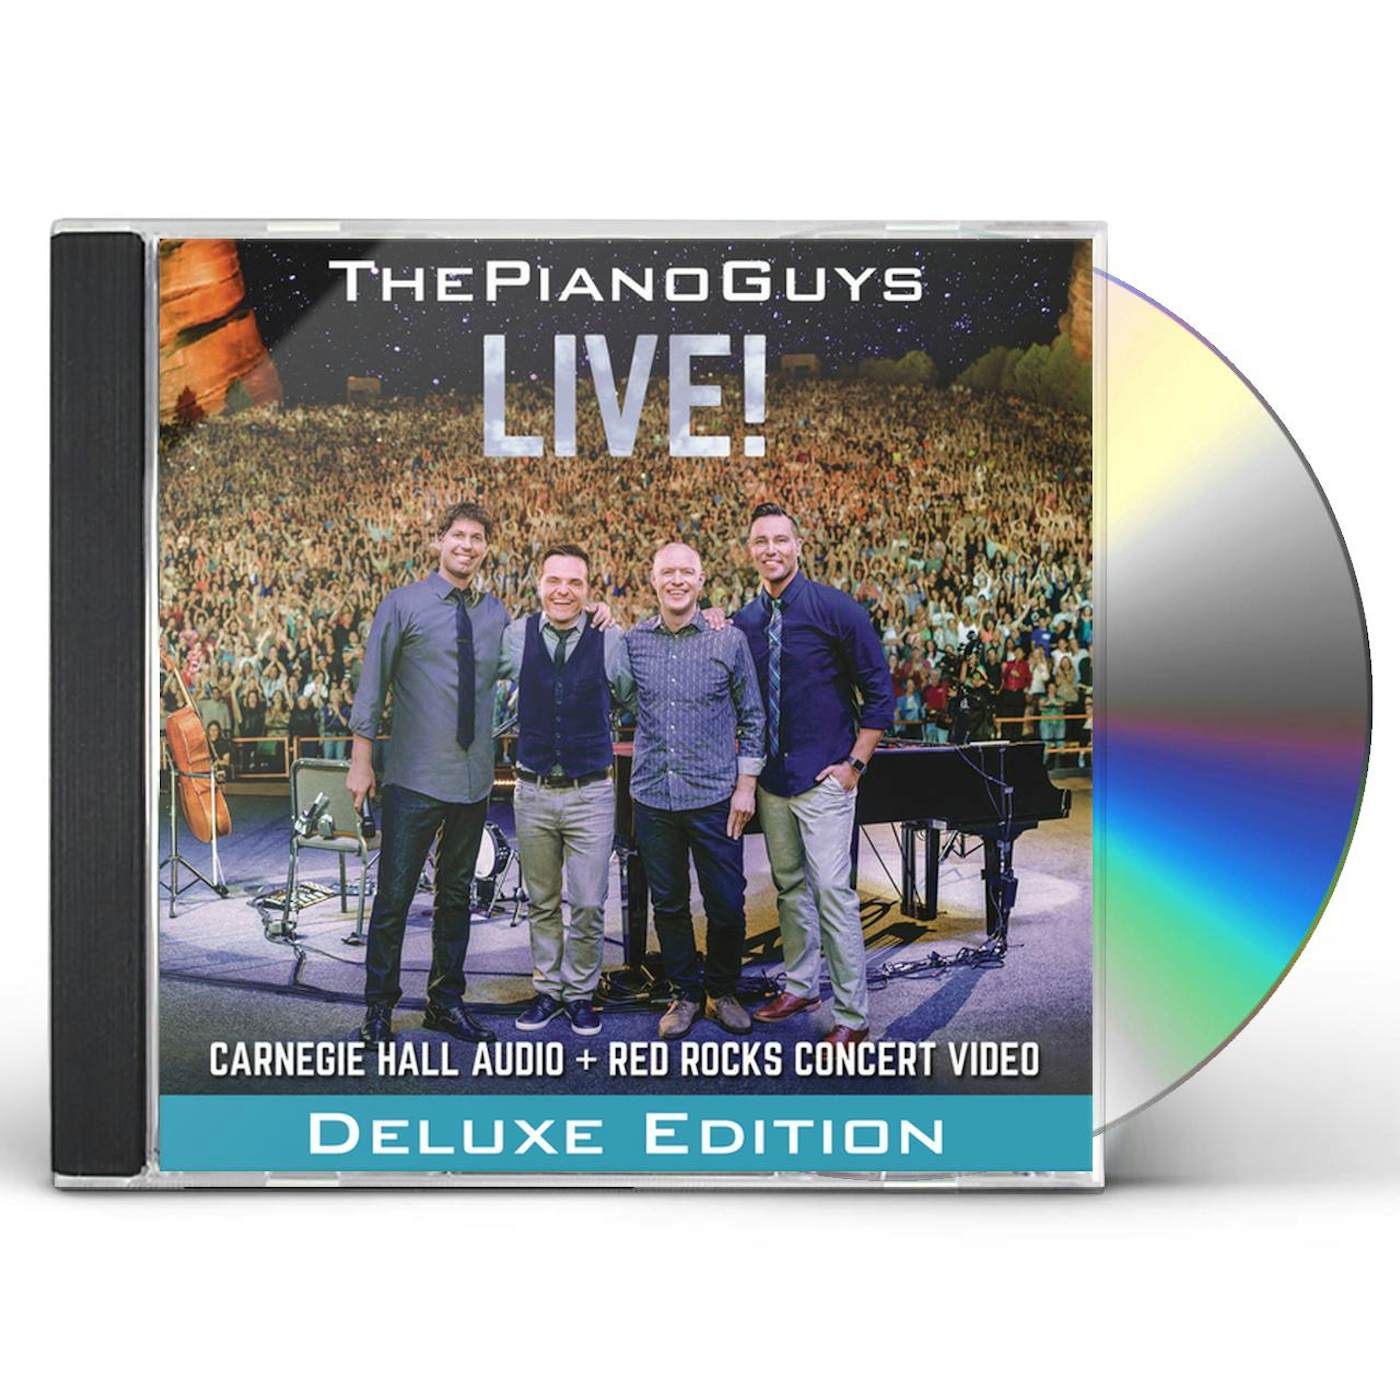 The Piano Guys LIVE CD